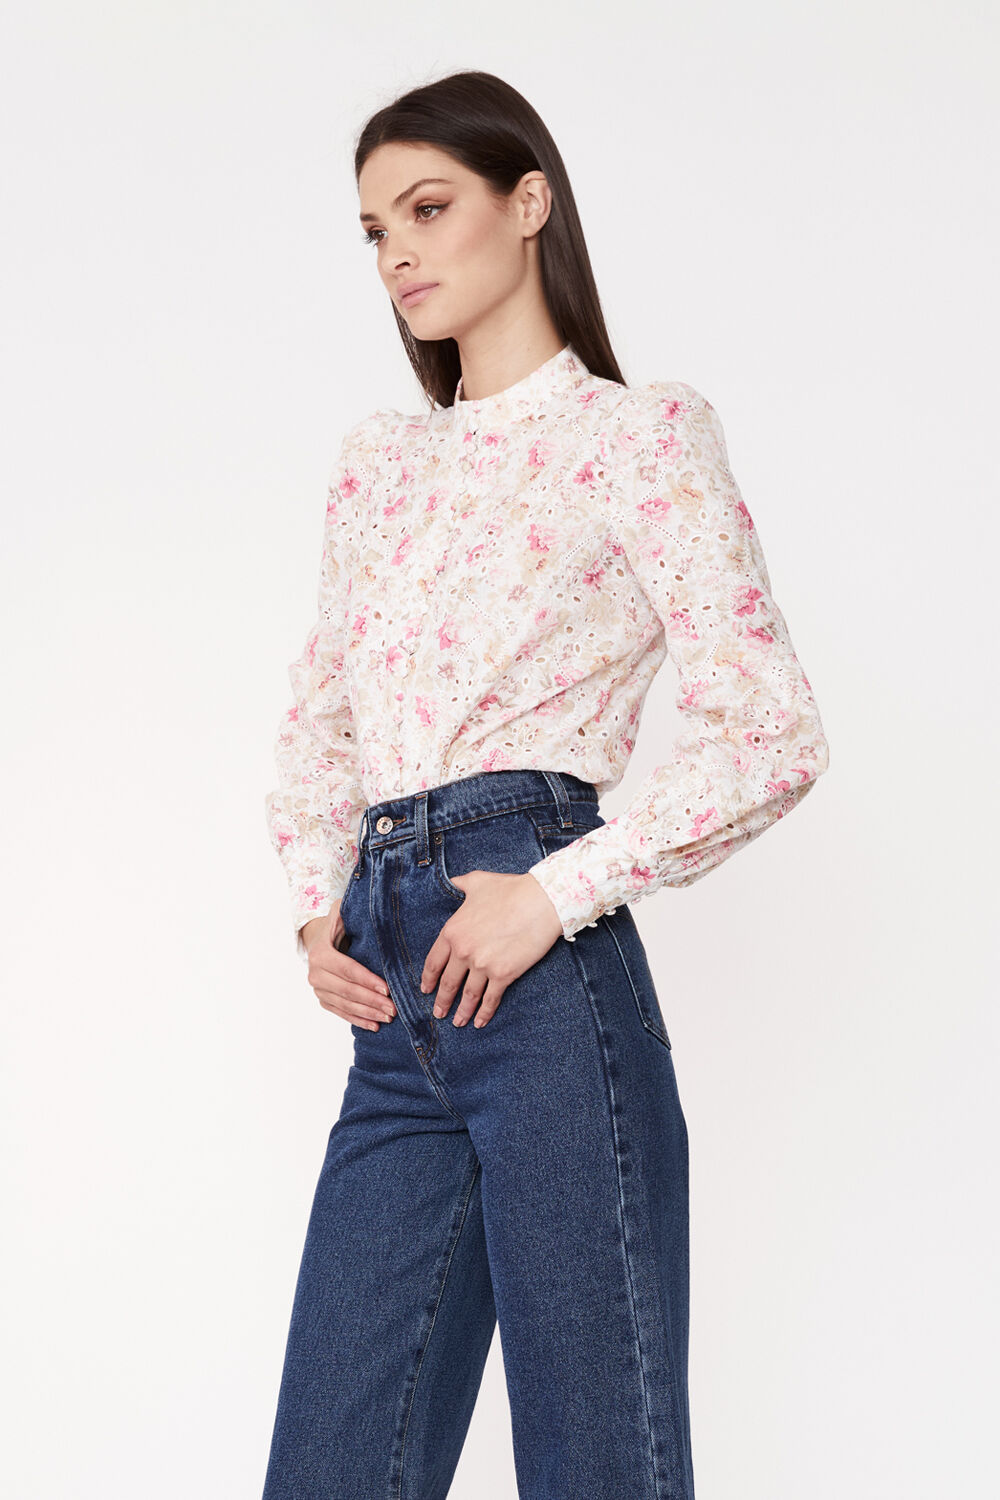 HENDRY FLORAL TOP in colour ROSE TAN